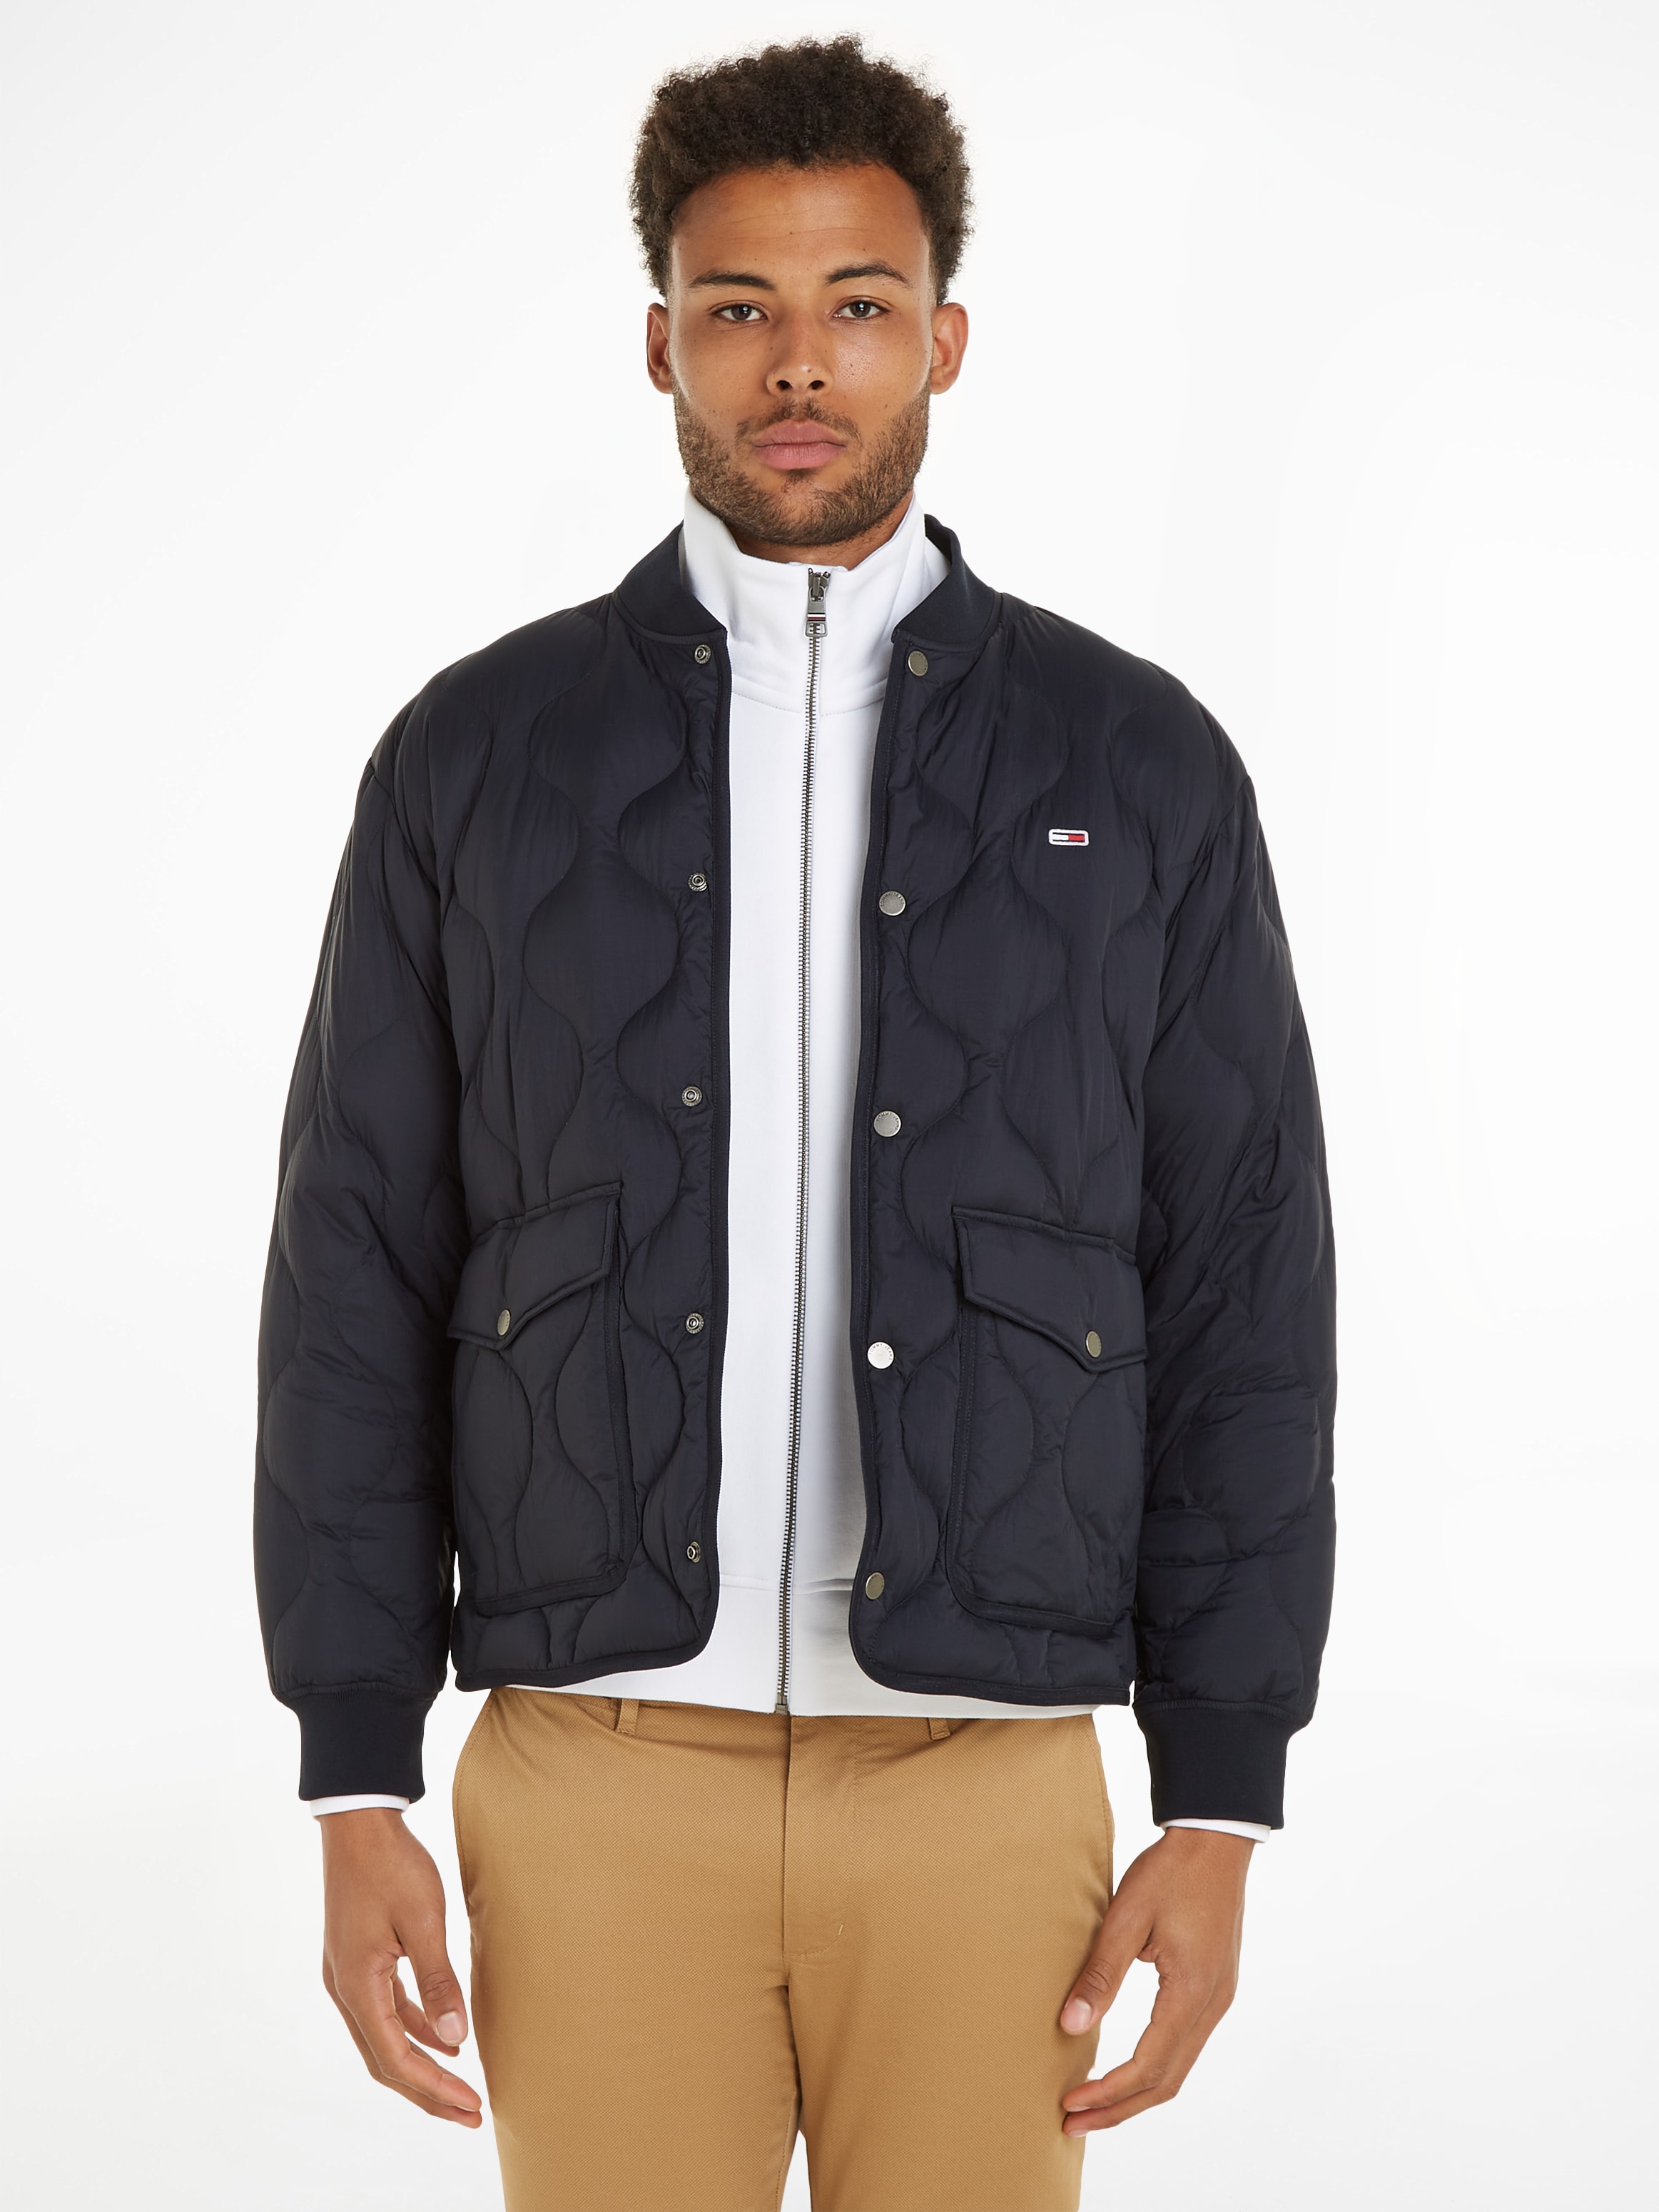 Tommy Jeans shoppen online bei LT OTTO JACKET«, QUILTED Steppjacke DOWN ohne »TJM Kapuze